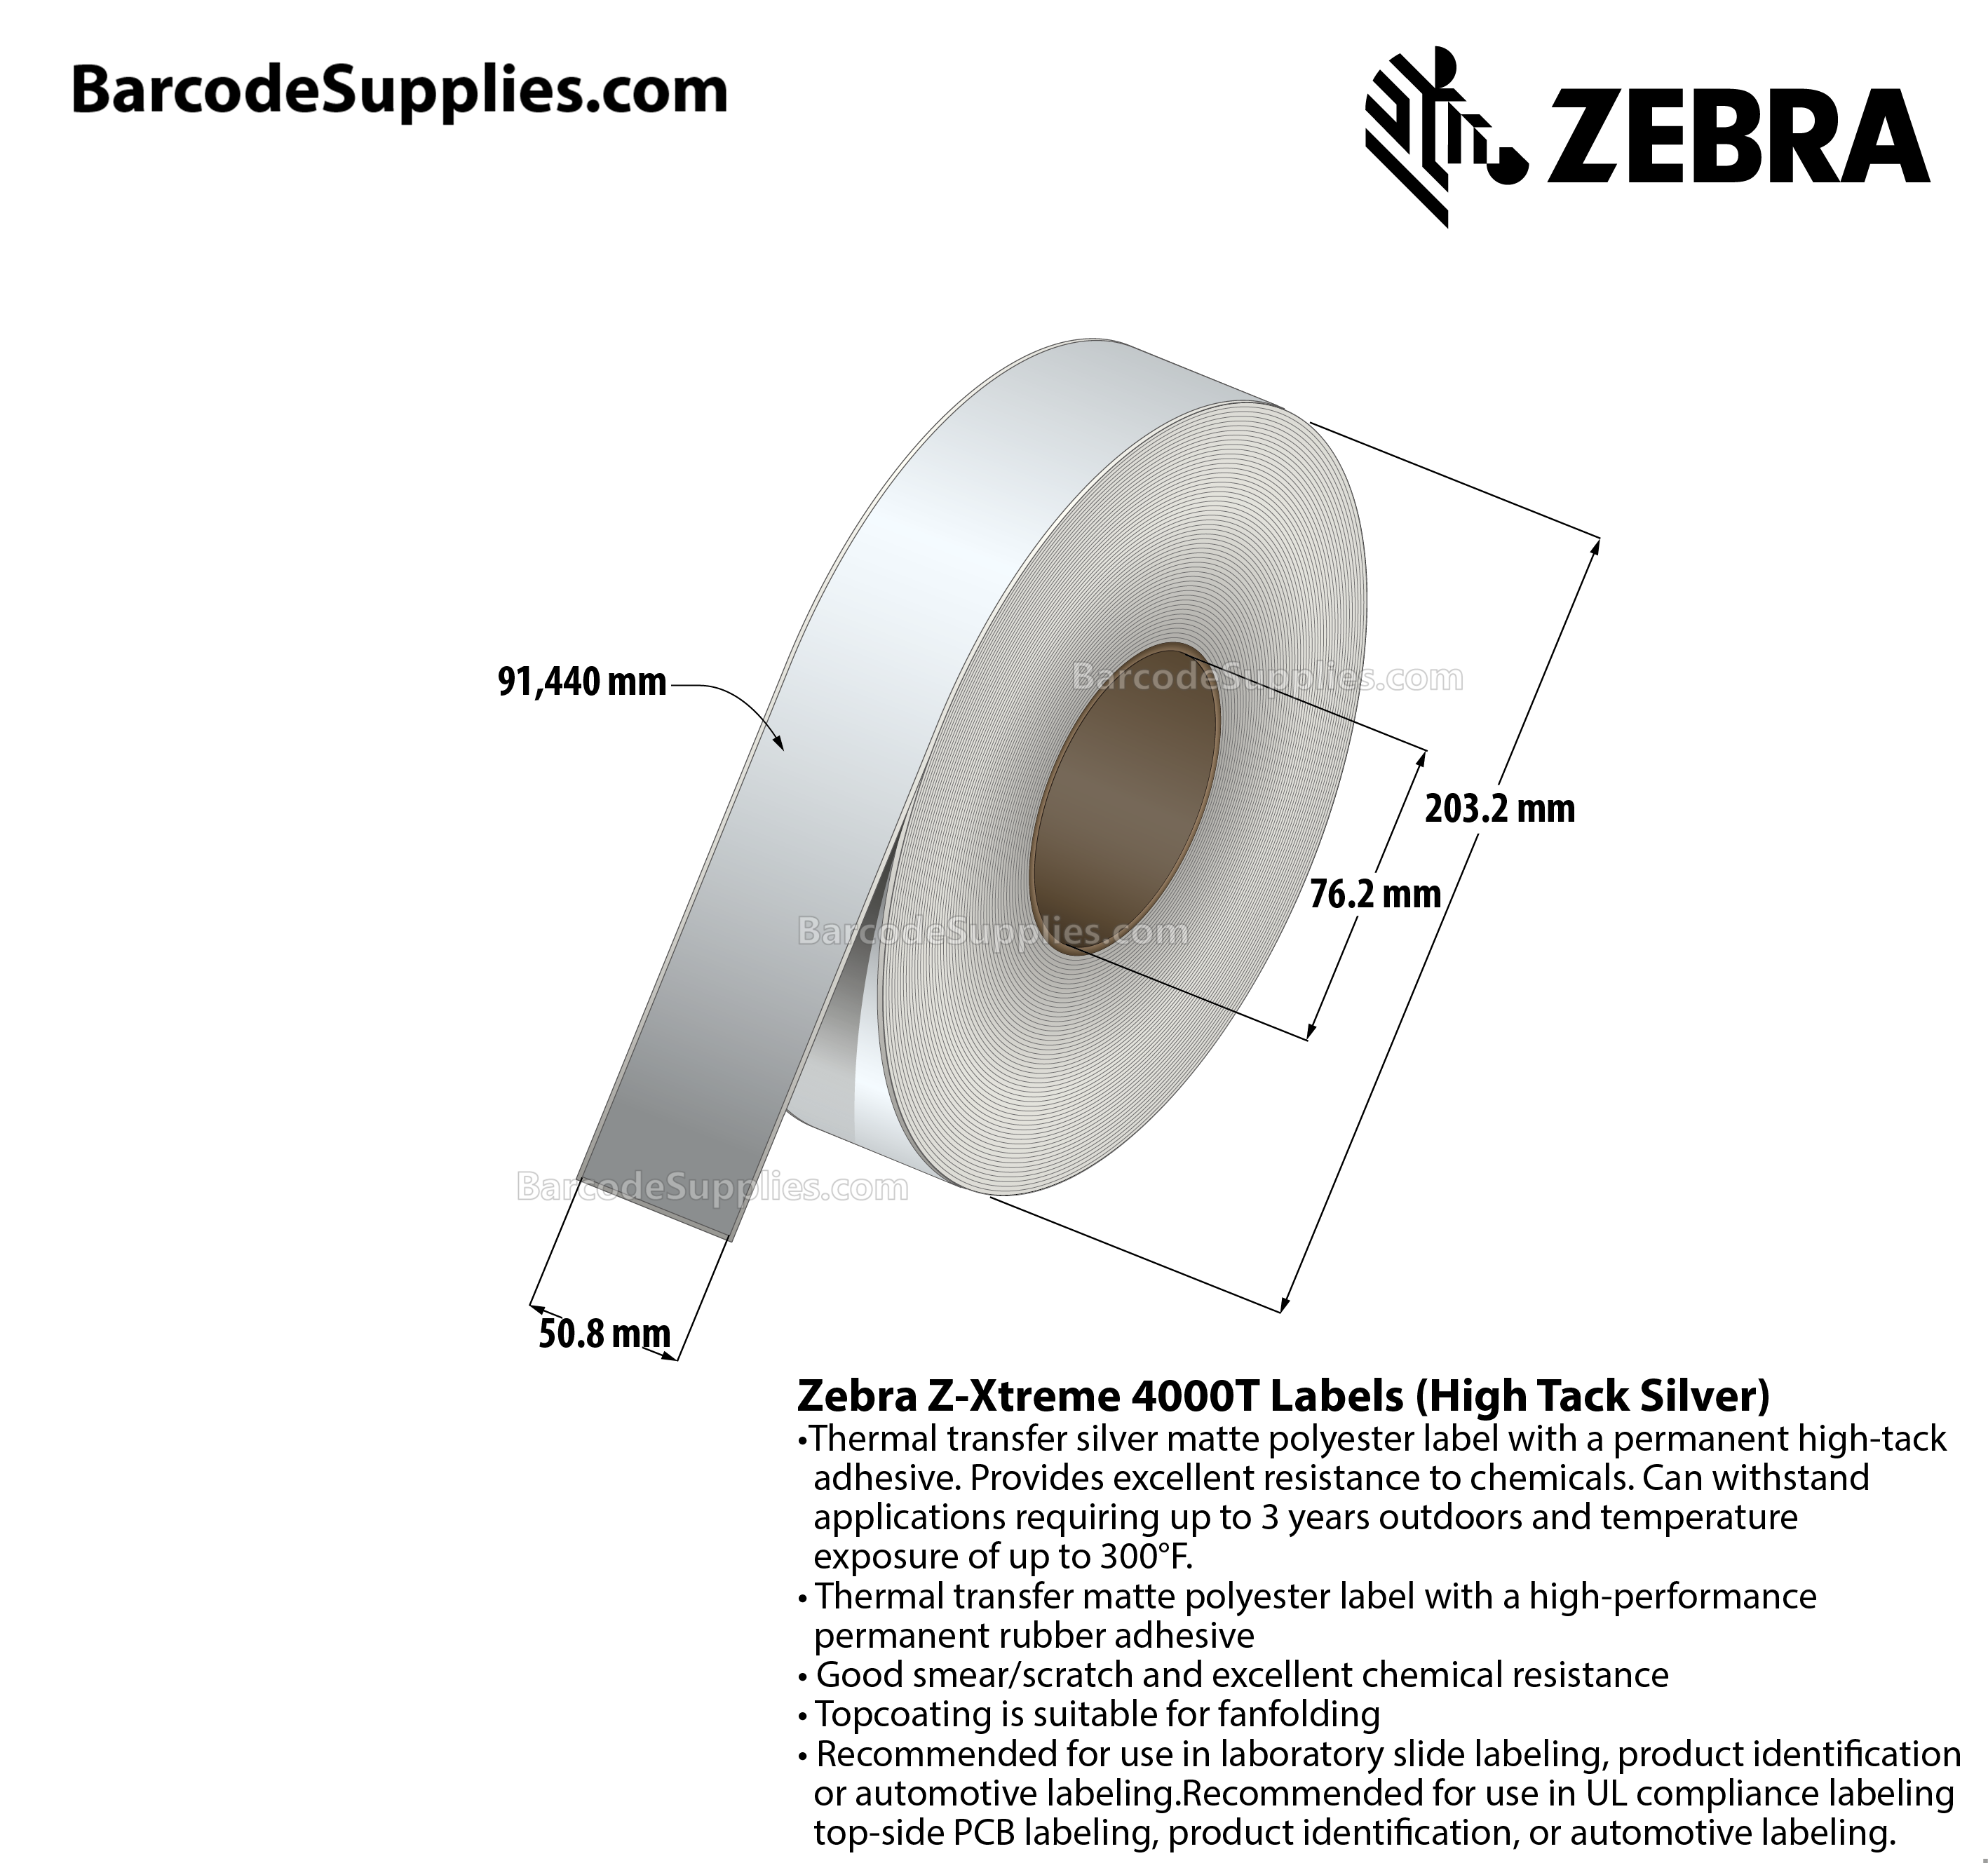 2 x 300' Thermal Transfer Silver Z-Xtreme 4000T High-Tack Silver Labels With High-tack Adhesive - Continuous - Labels Per Roll - Carton Of 1 Rolls - 0 Labels Total - MPN: 10023176